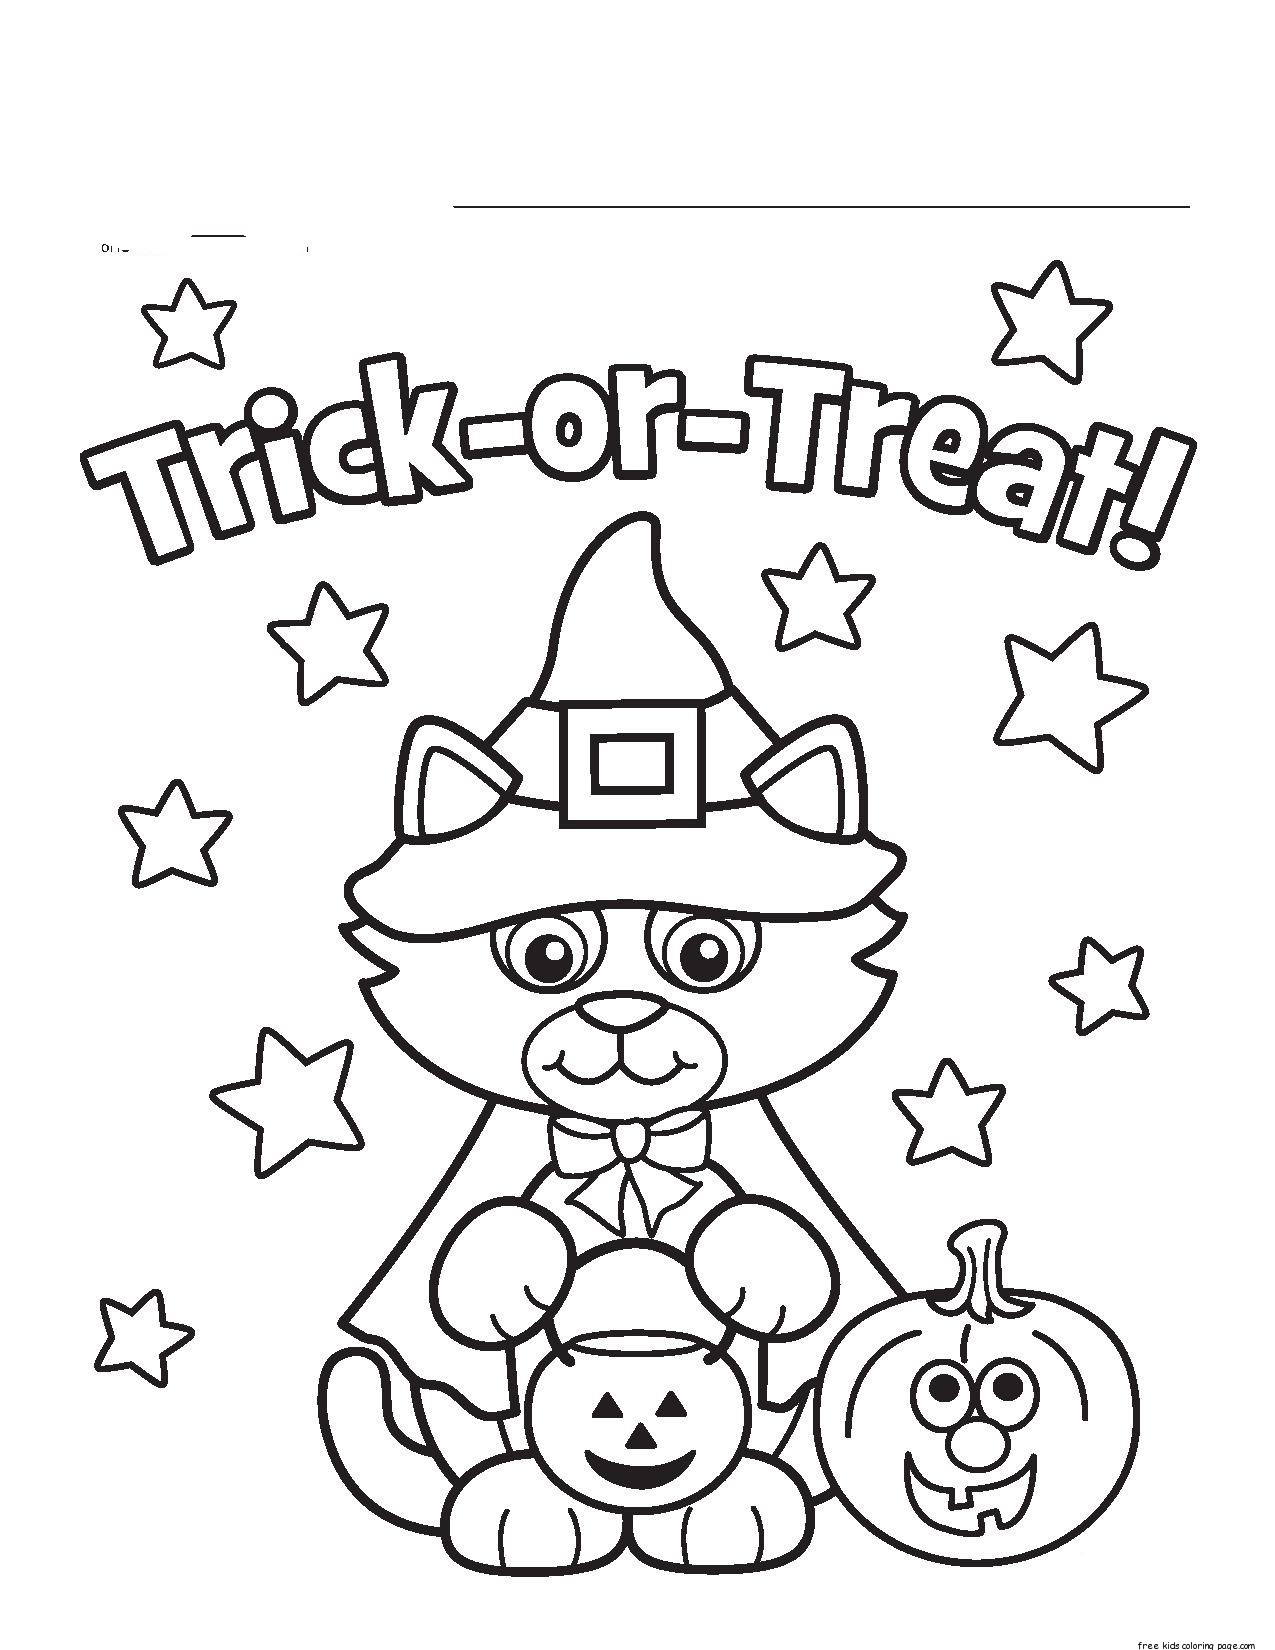 Halloween Cat Coloring Pages   Free Printable Coloring Pages for Kids